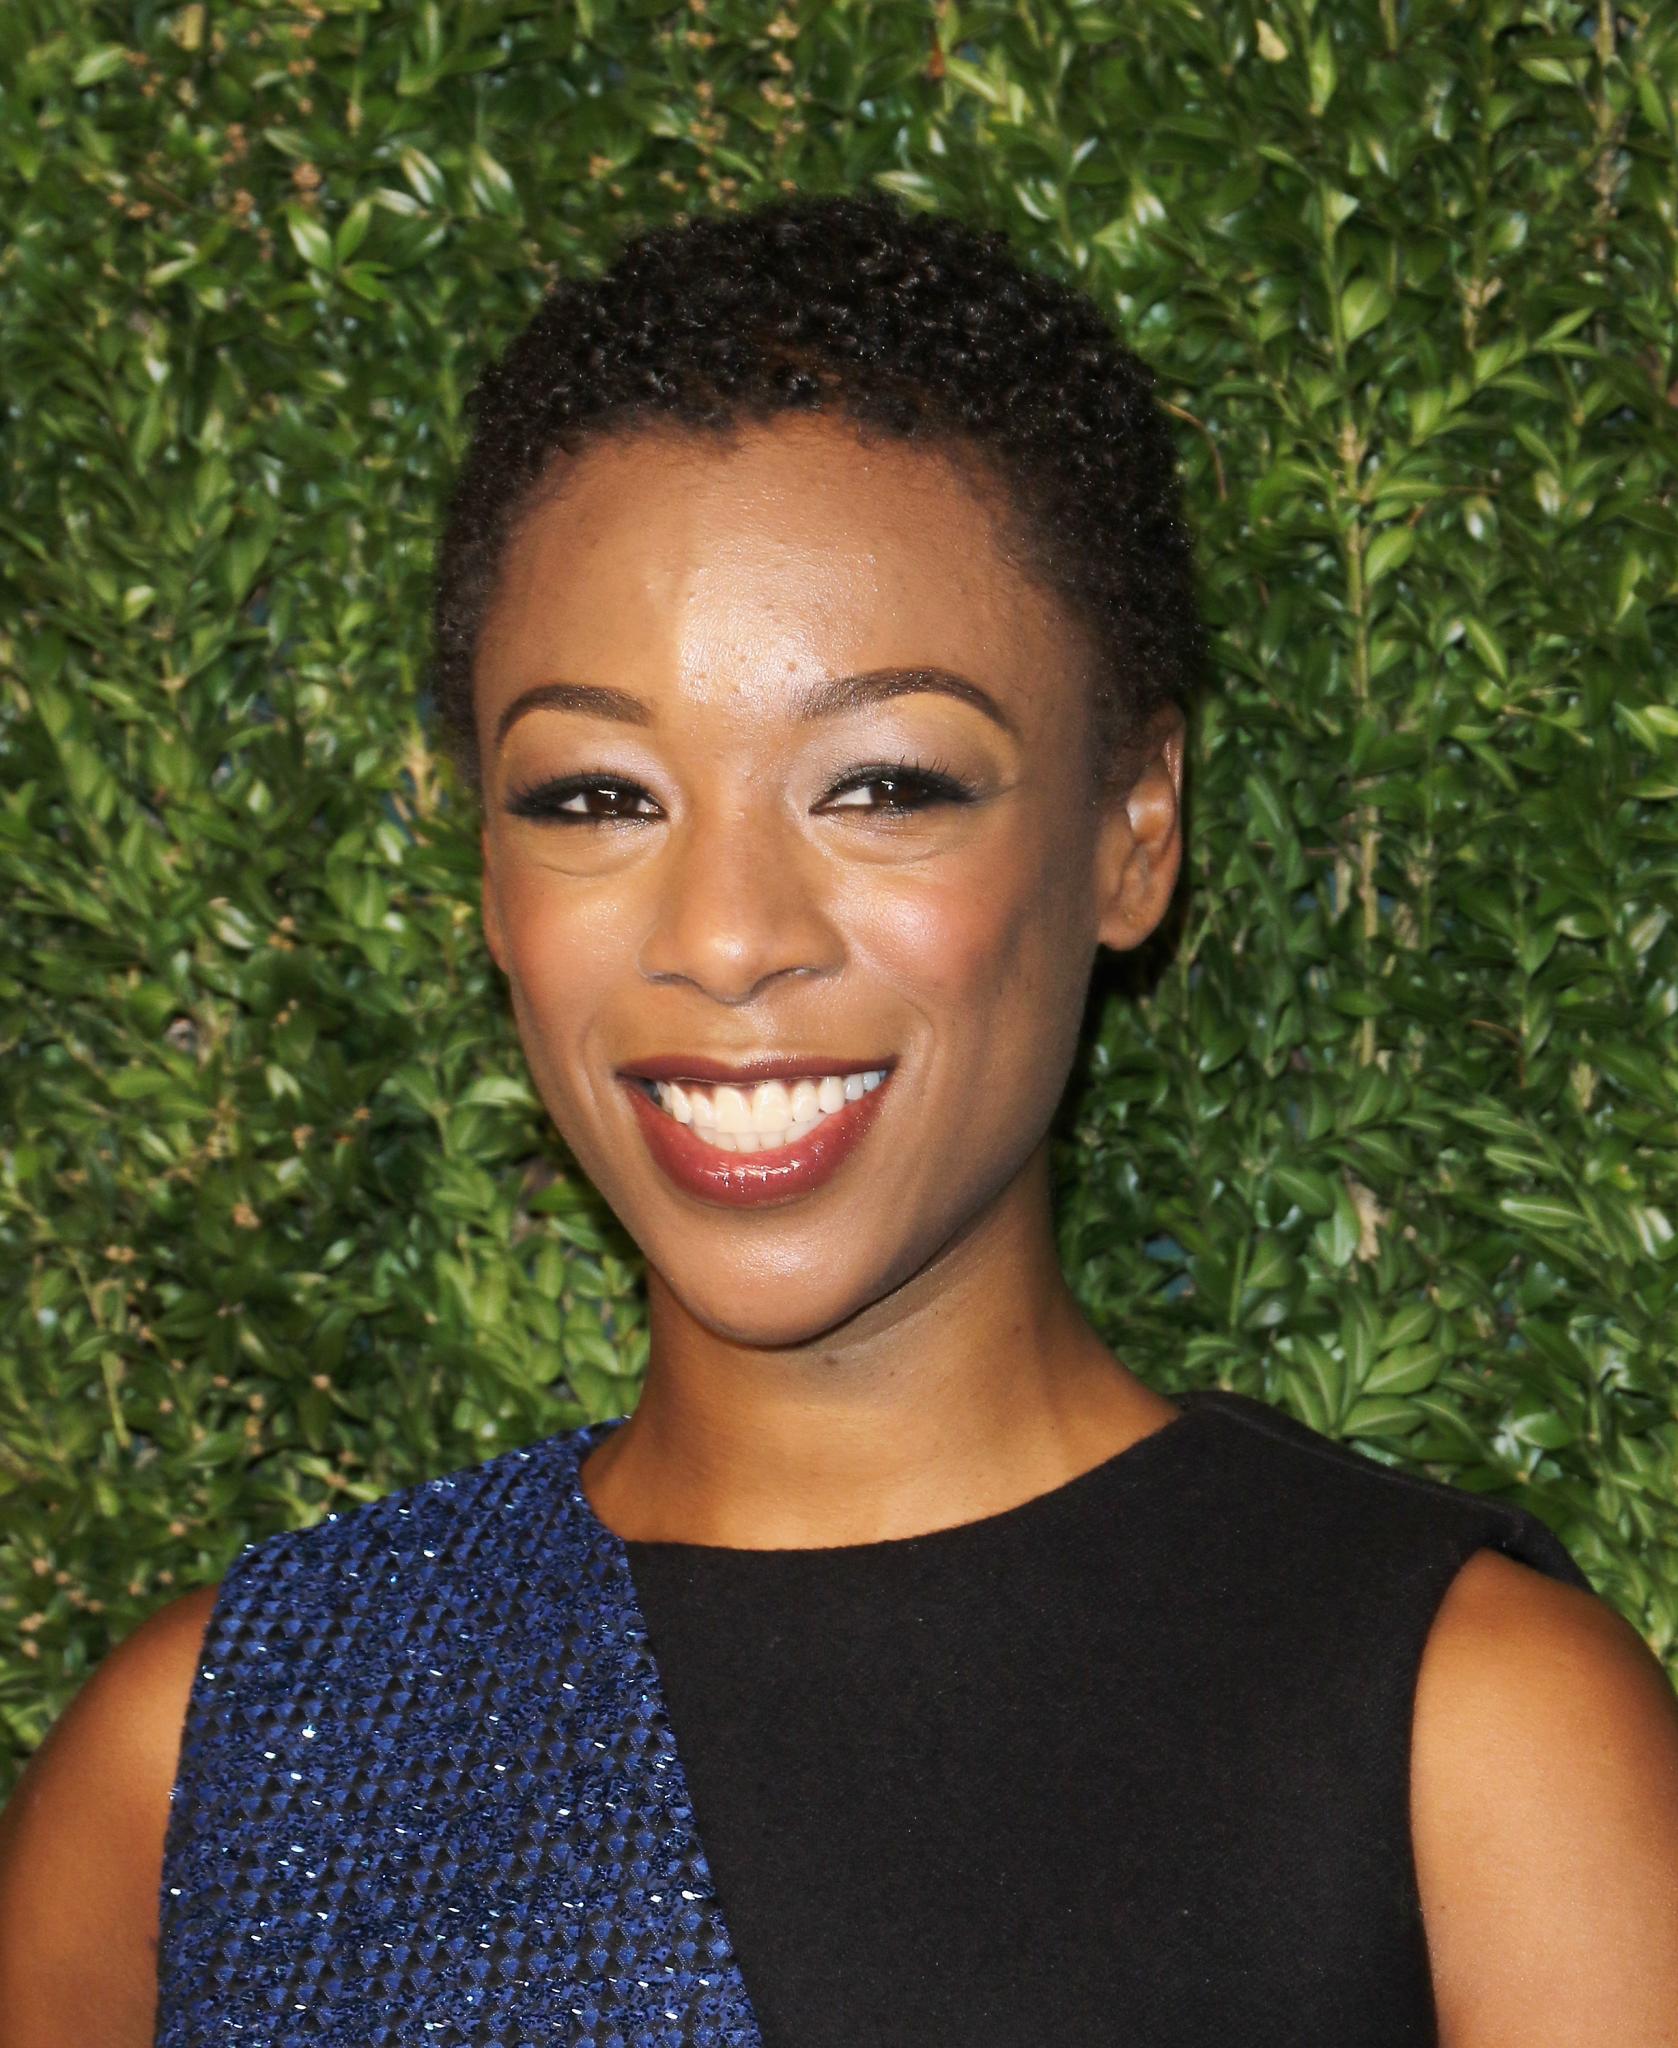 Former 'OITNB' Star Samira Wiley Is Engaged!
